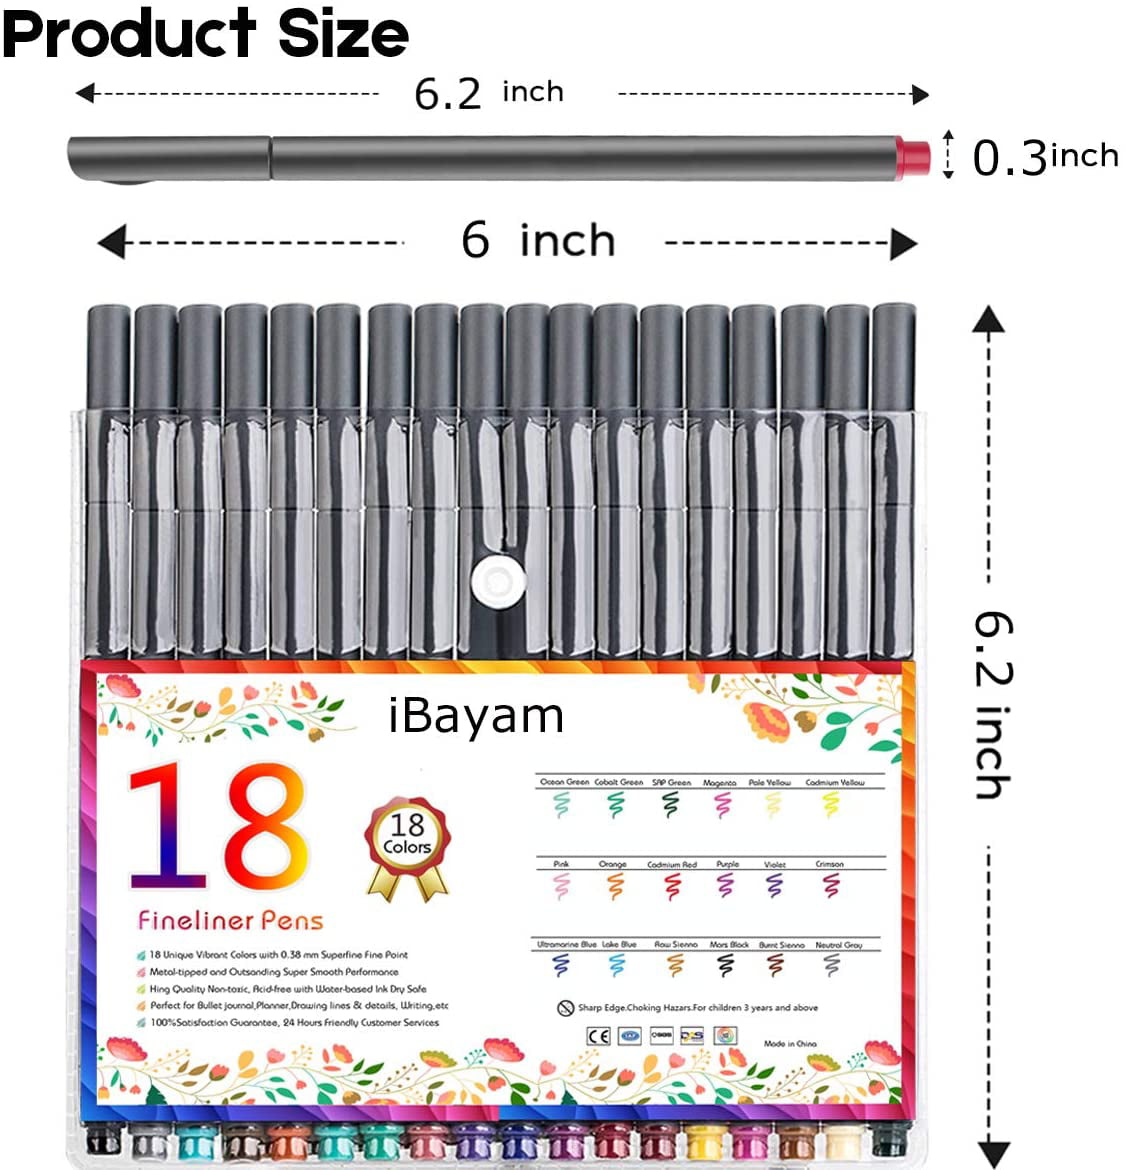 iBayam Fineliner Pens, 24 Bright Colors Pens – Spicer Sells